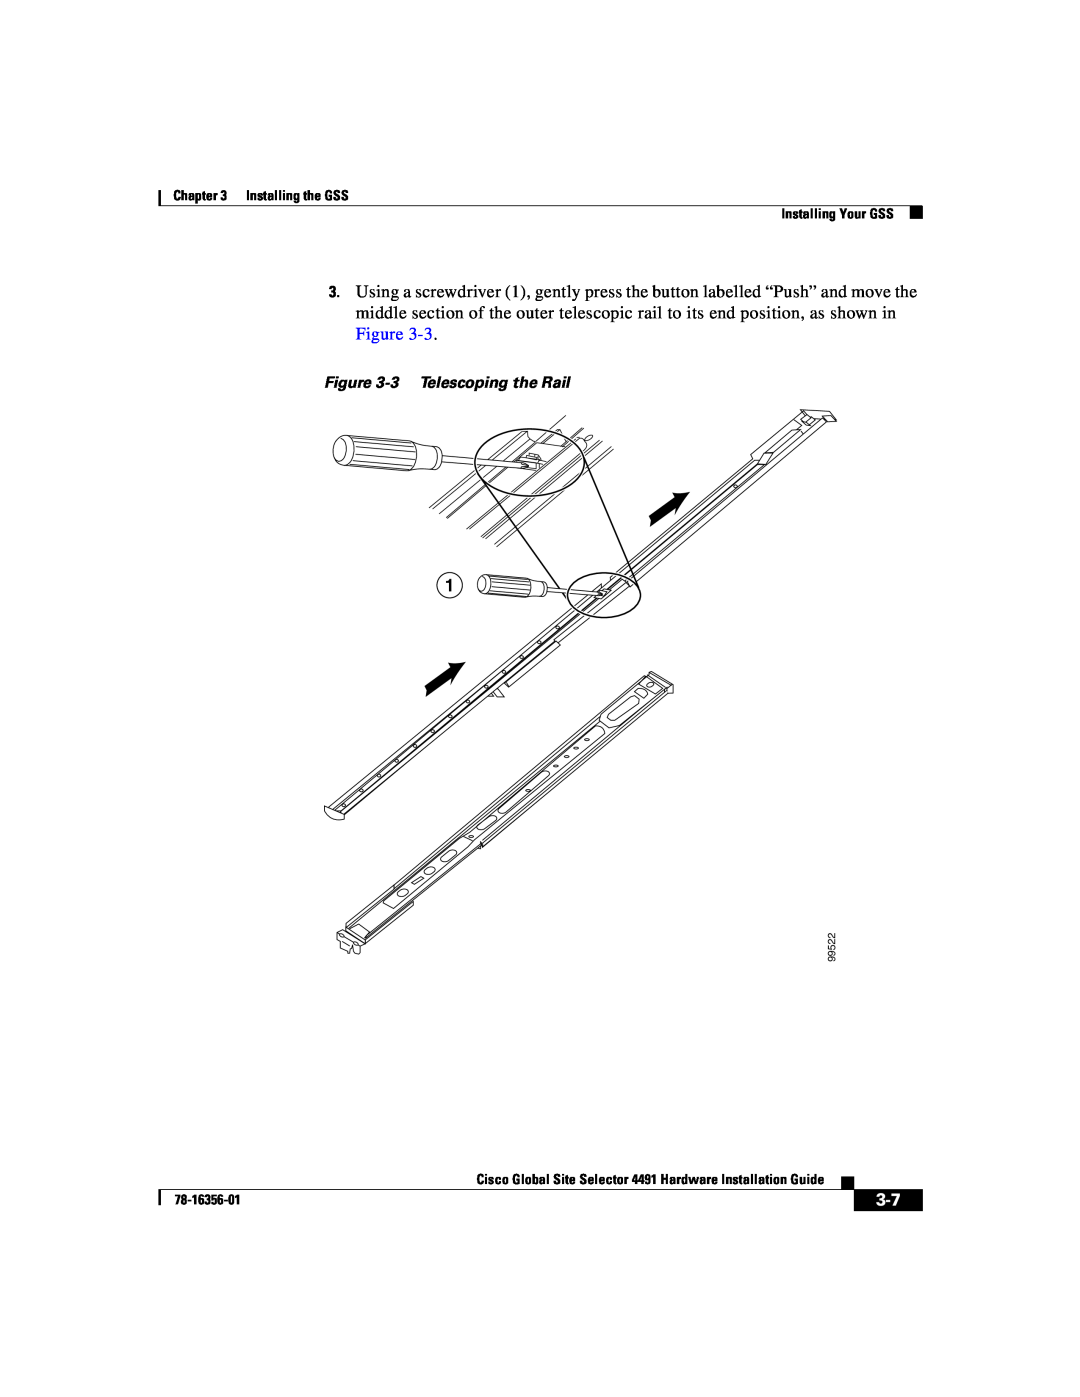 Cisco Systems 78-16356-01 manual 3 Telescoping the Rail, Installing the GSS Installing Your GSS, 99522 